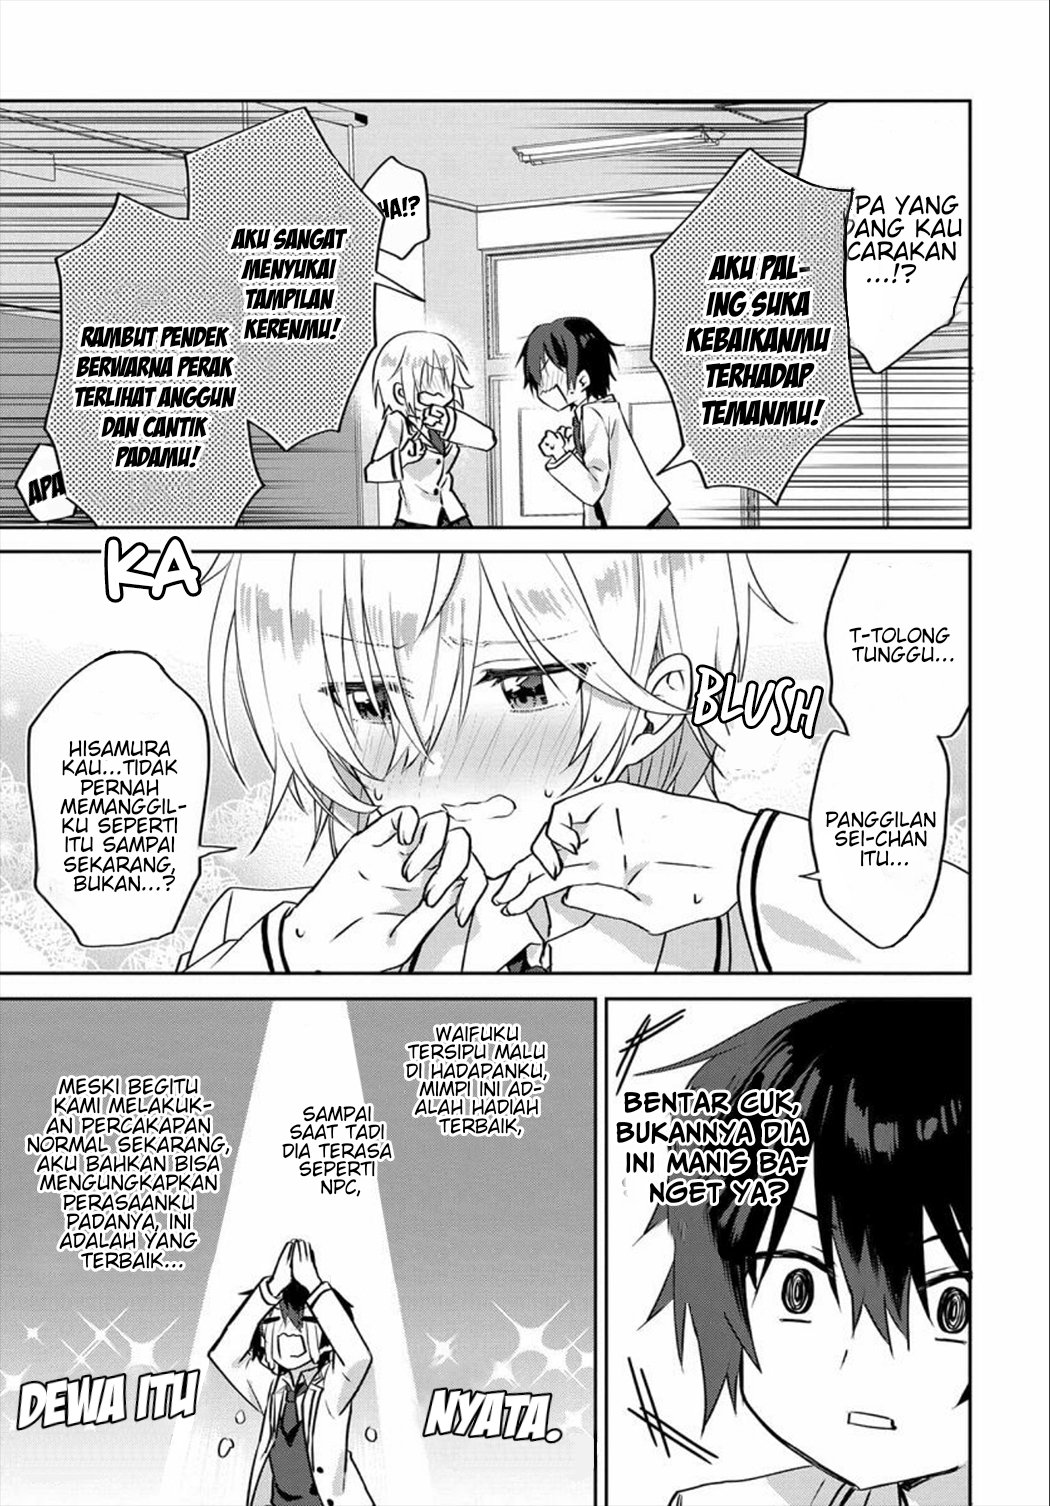 Since I'Ve Entered The World Of Romantic Comedy Manga, I'Ll Do My Best To Make The Losing Heroine Happy. Chapter 1 - 239